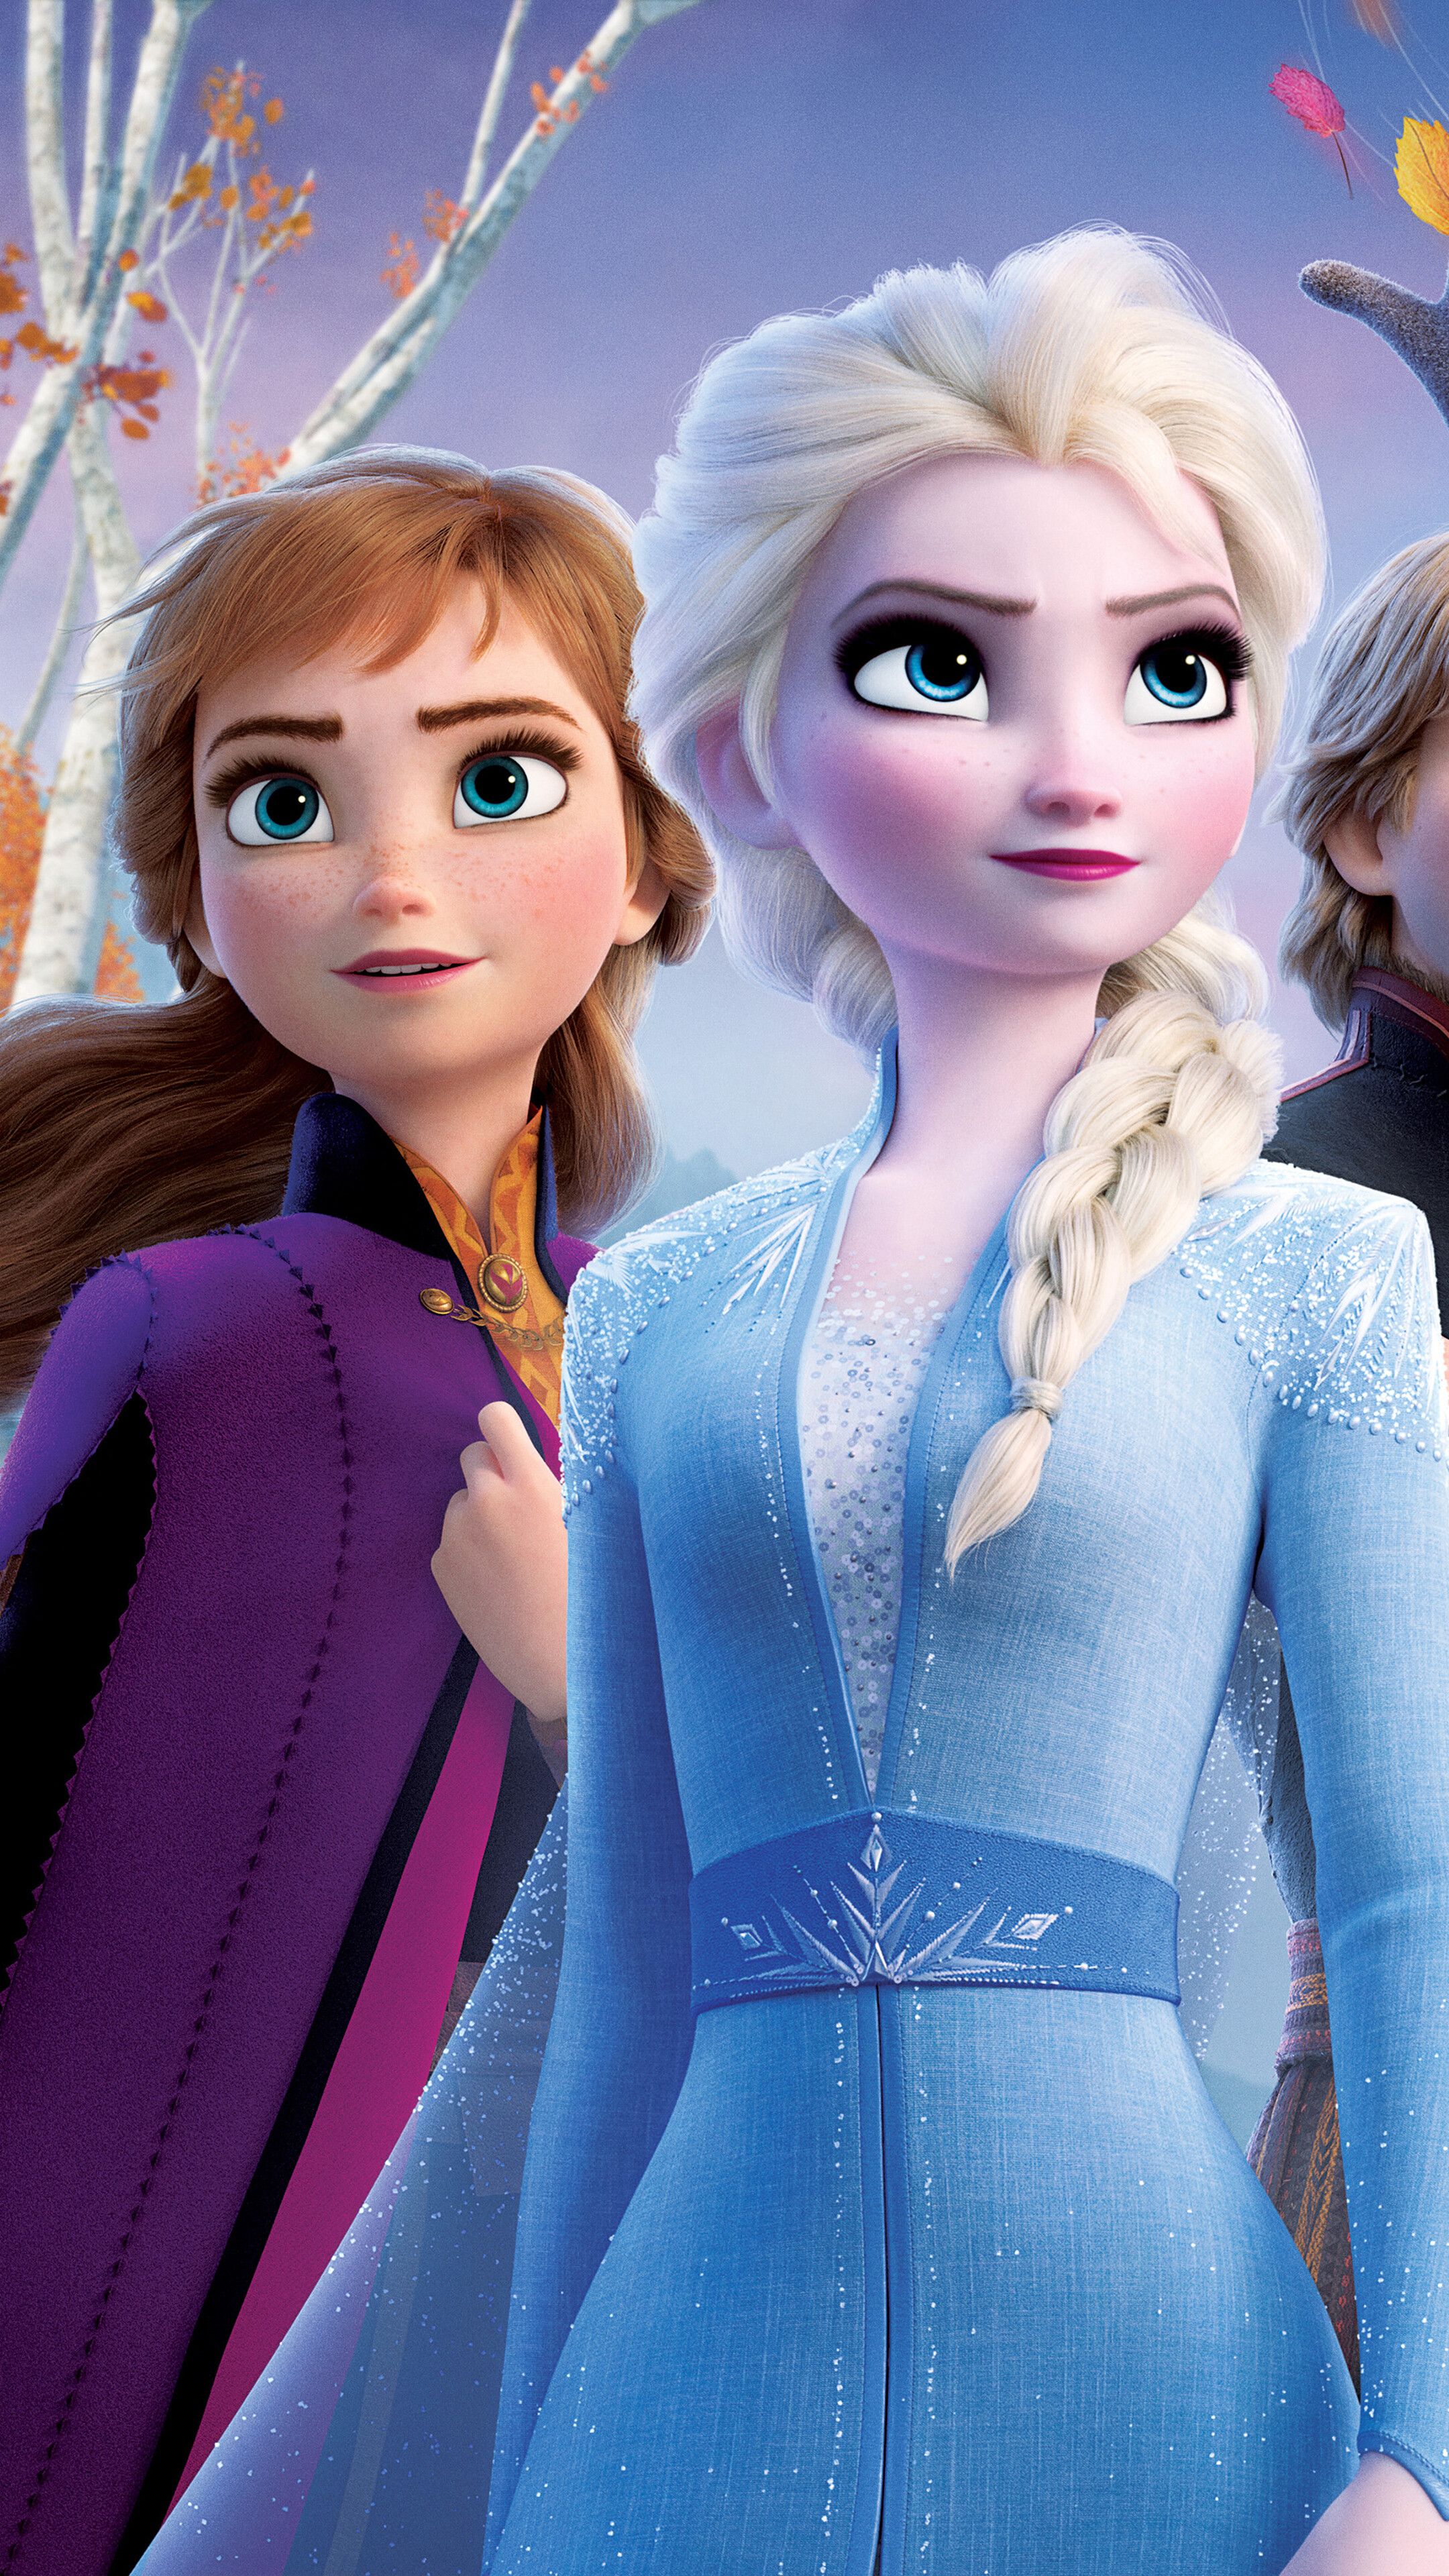 Frozen Poster, Elsa, Anna, Kristoff, Olaf phone HD Wallpaper, Image, Background, Photo and Picture